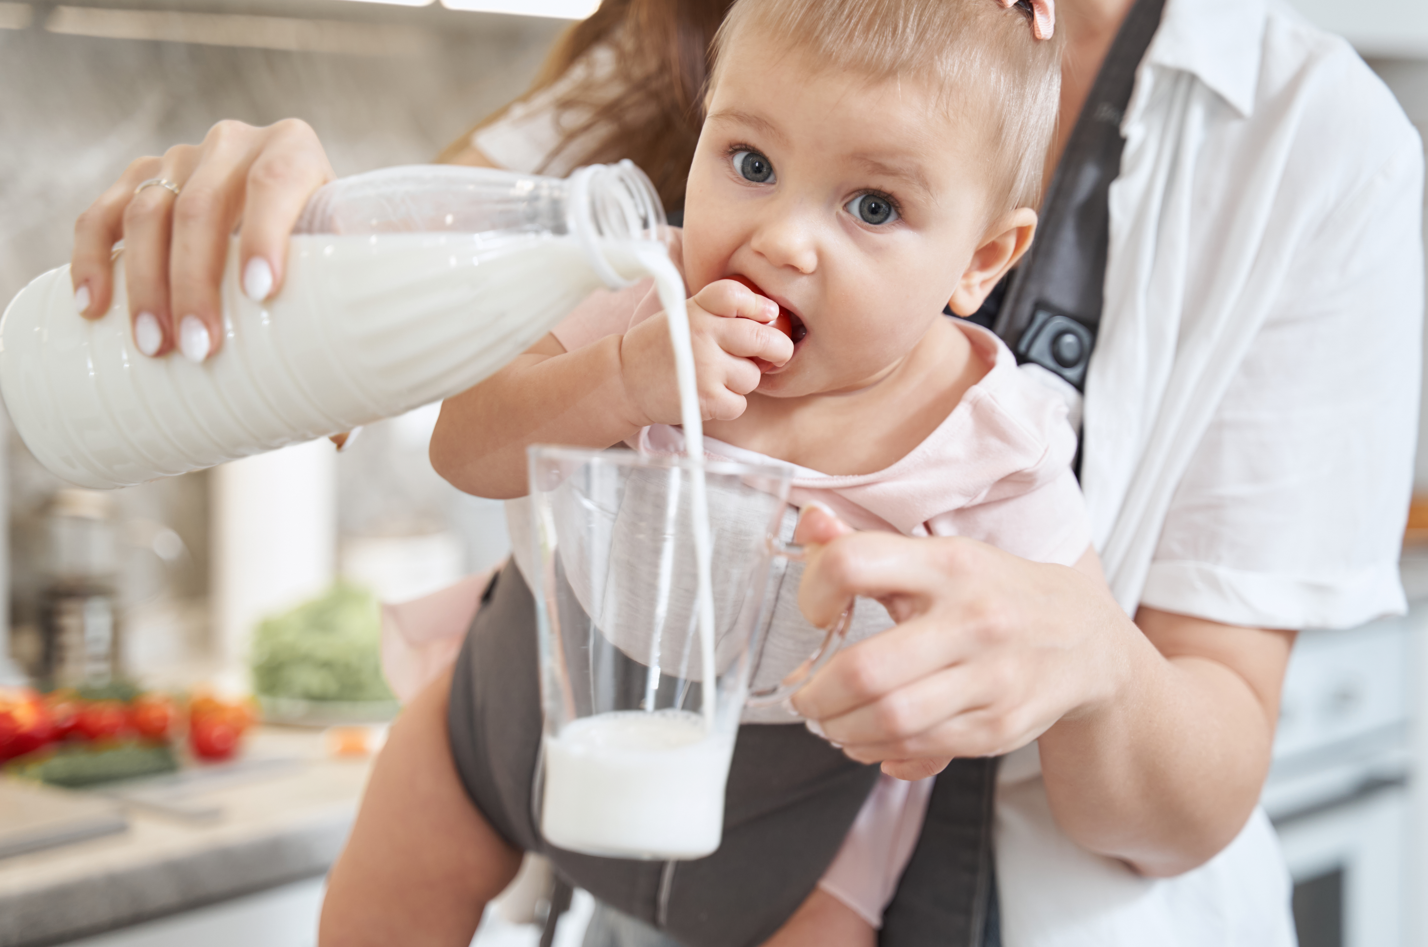 A mother pouring a glass of cow's milk while the baby watches from a baby carrier. Cow's milk is bad for babies.